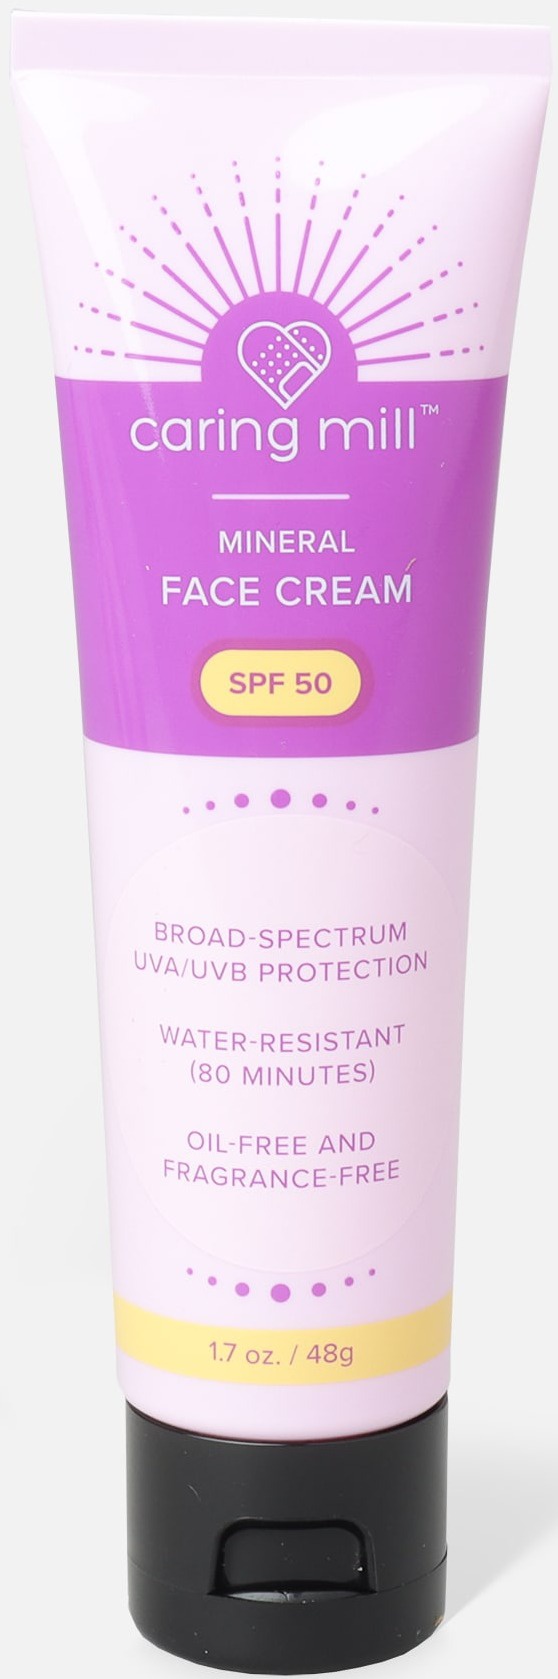 Caring Mill SPF 50 Mineral Face Cream